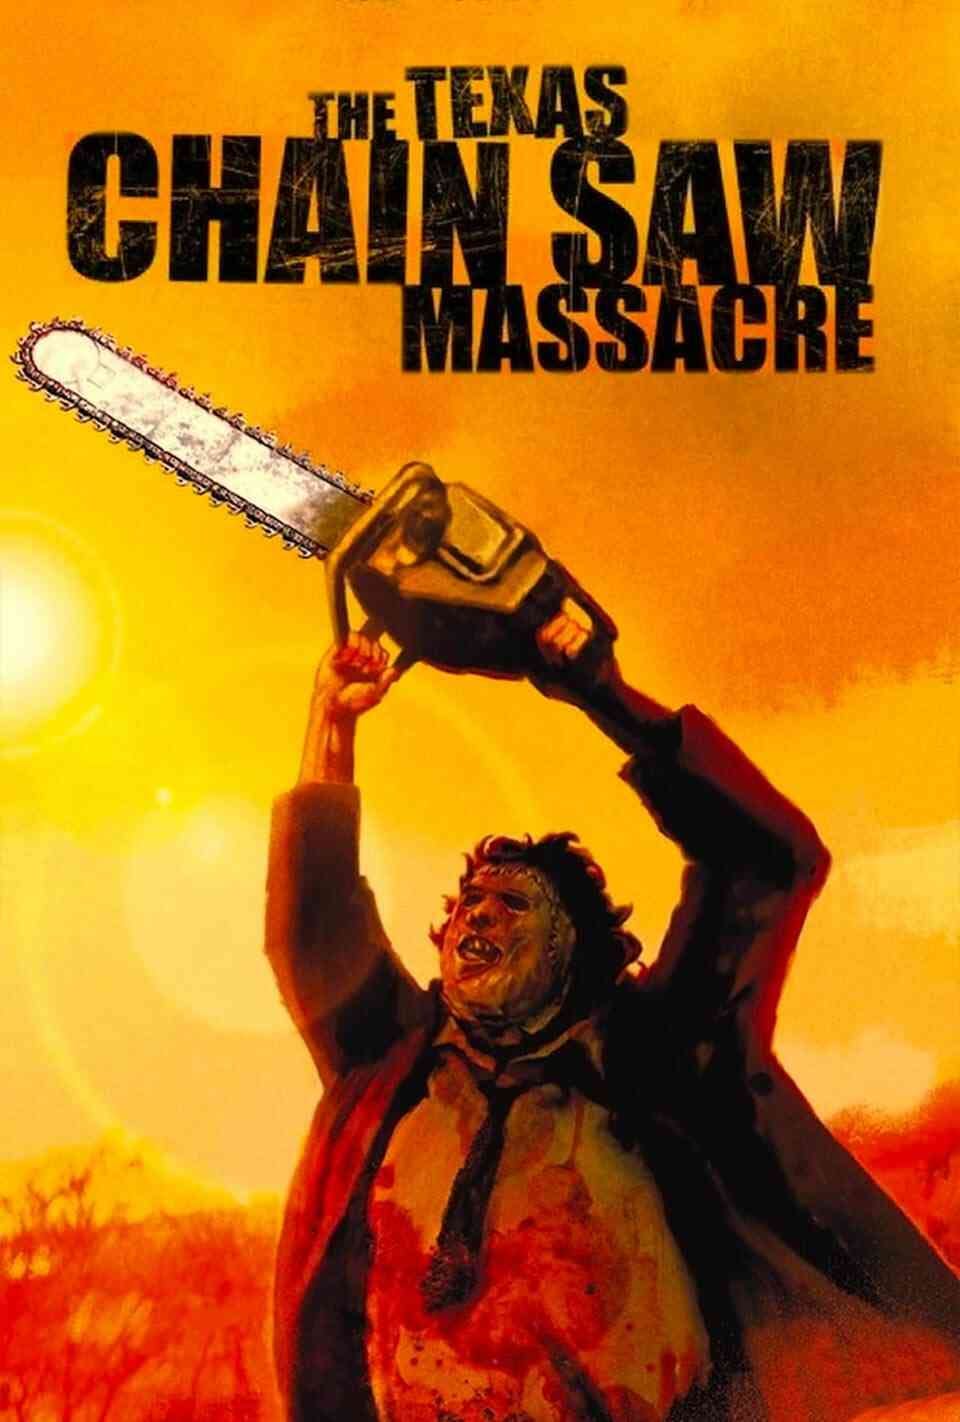 Read The Texas Chain Saw Massacre screenplay (poster)